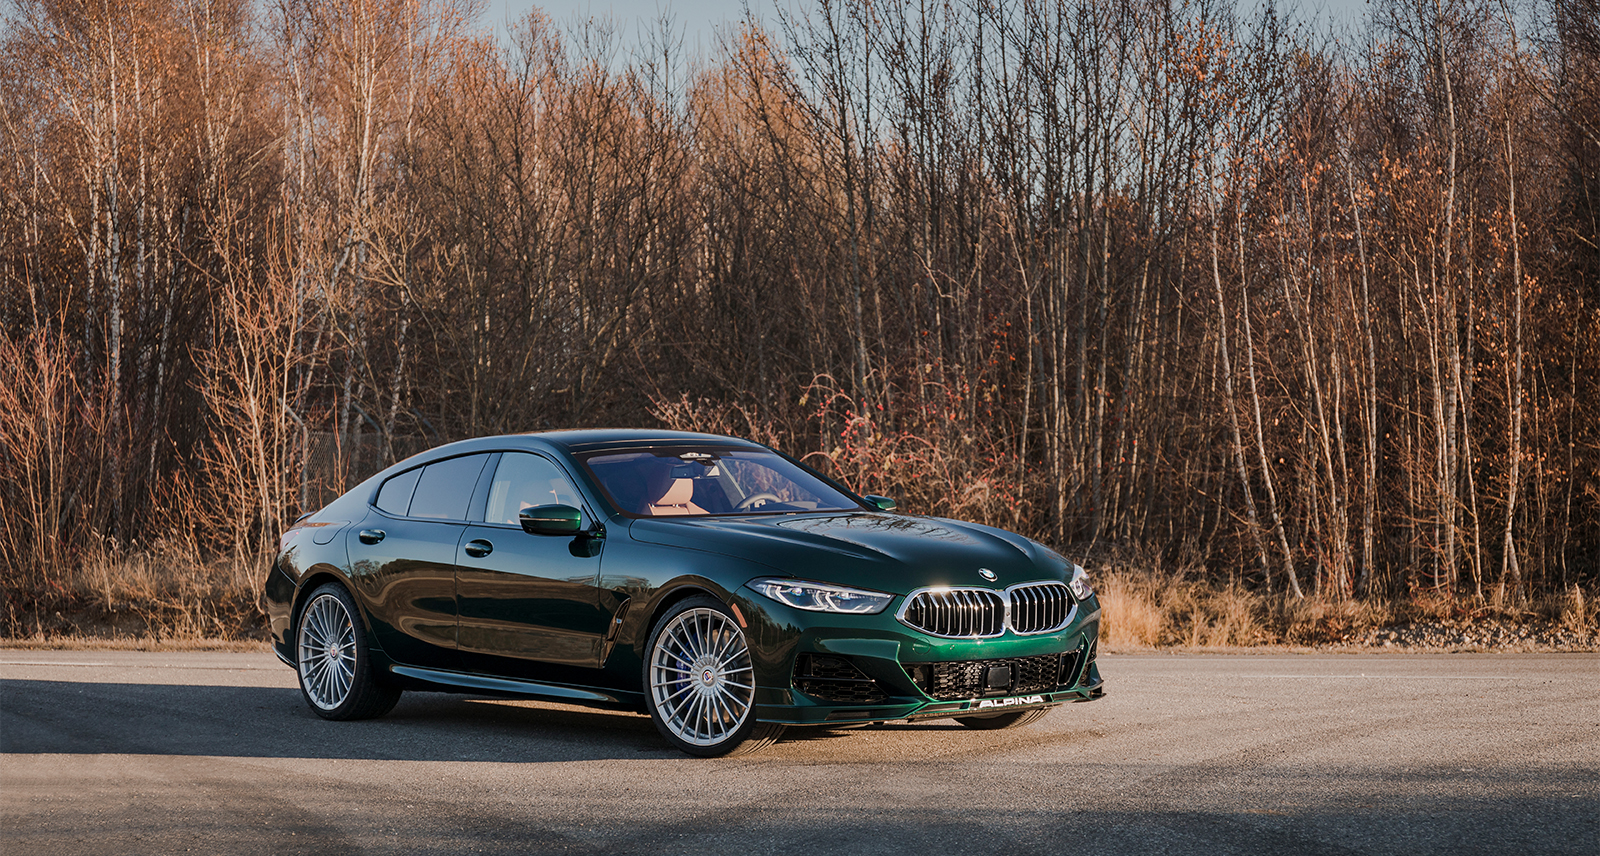 The 2022 Alpina B8 Gran Coupe Is the Final BMW